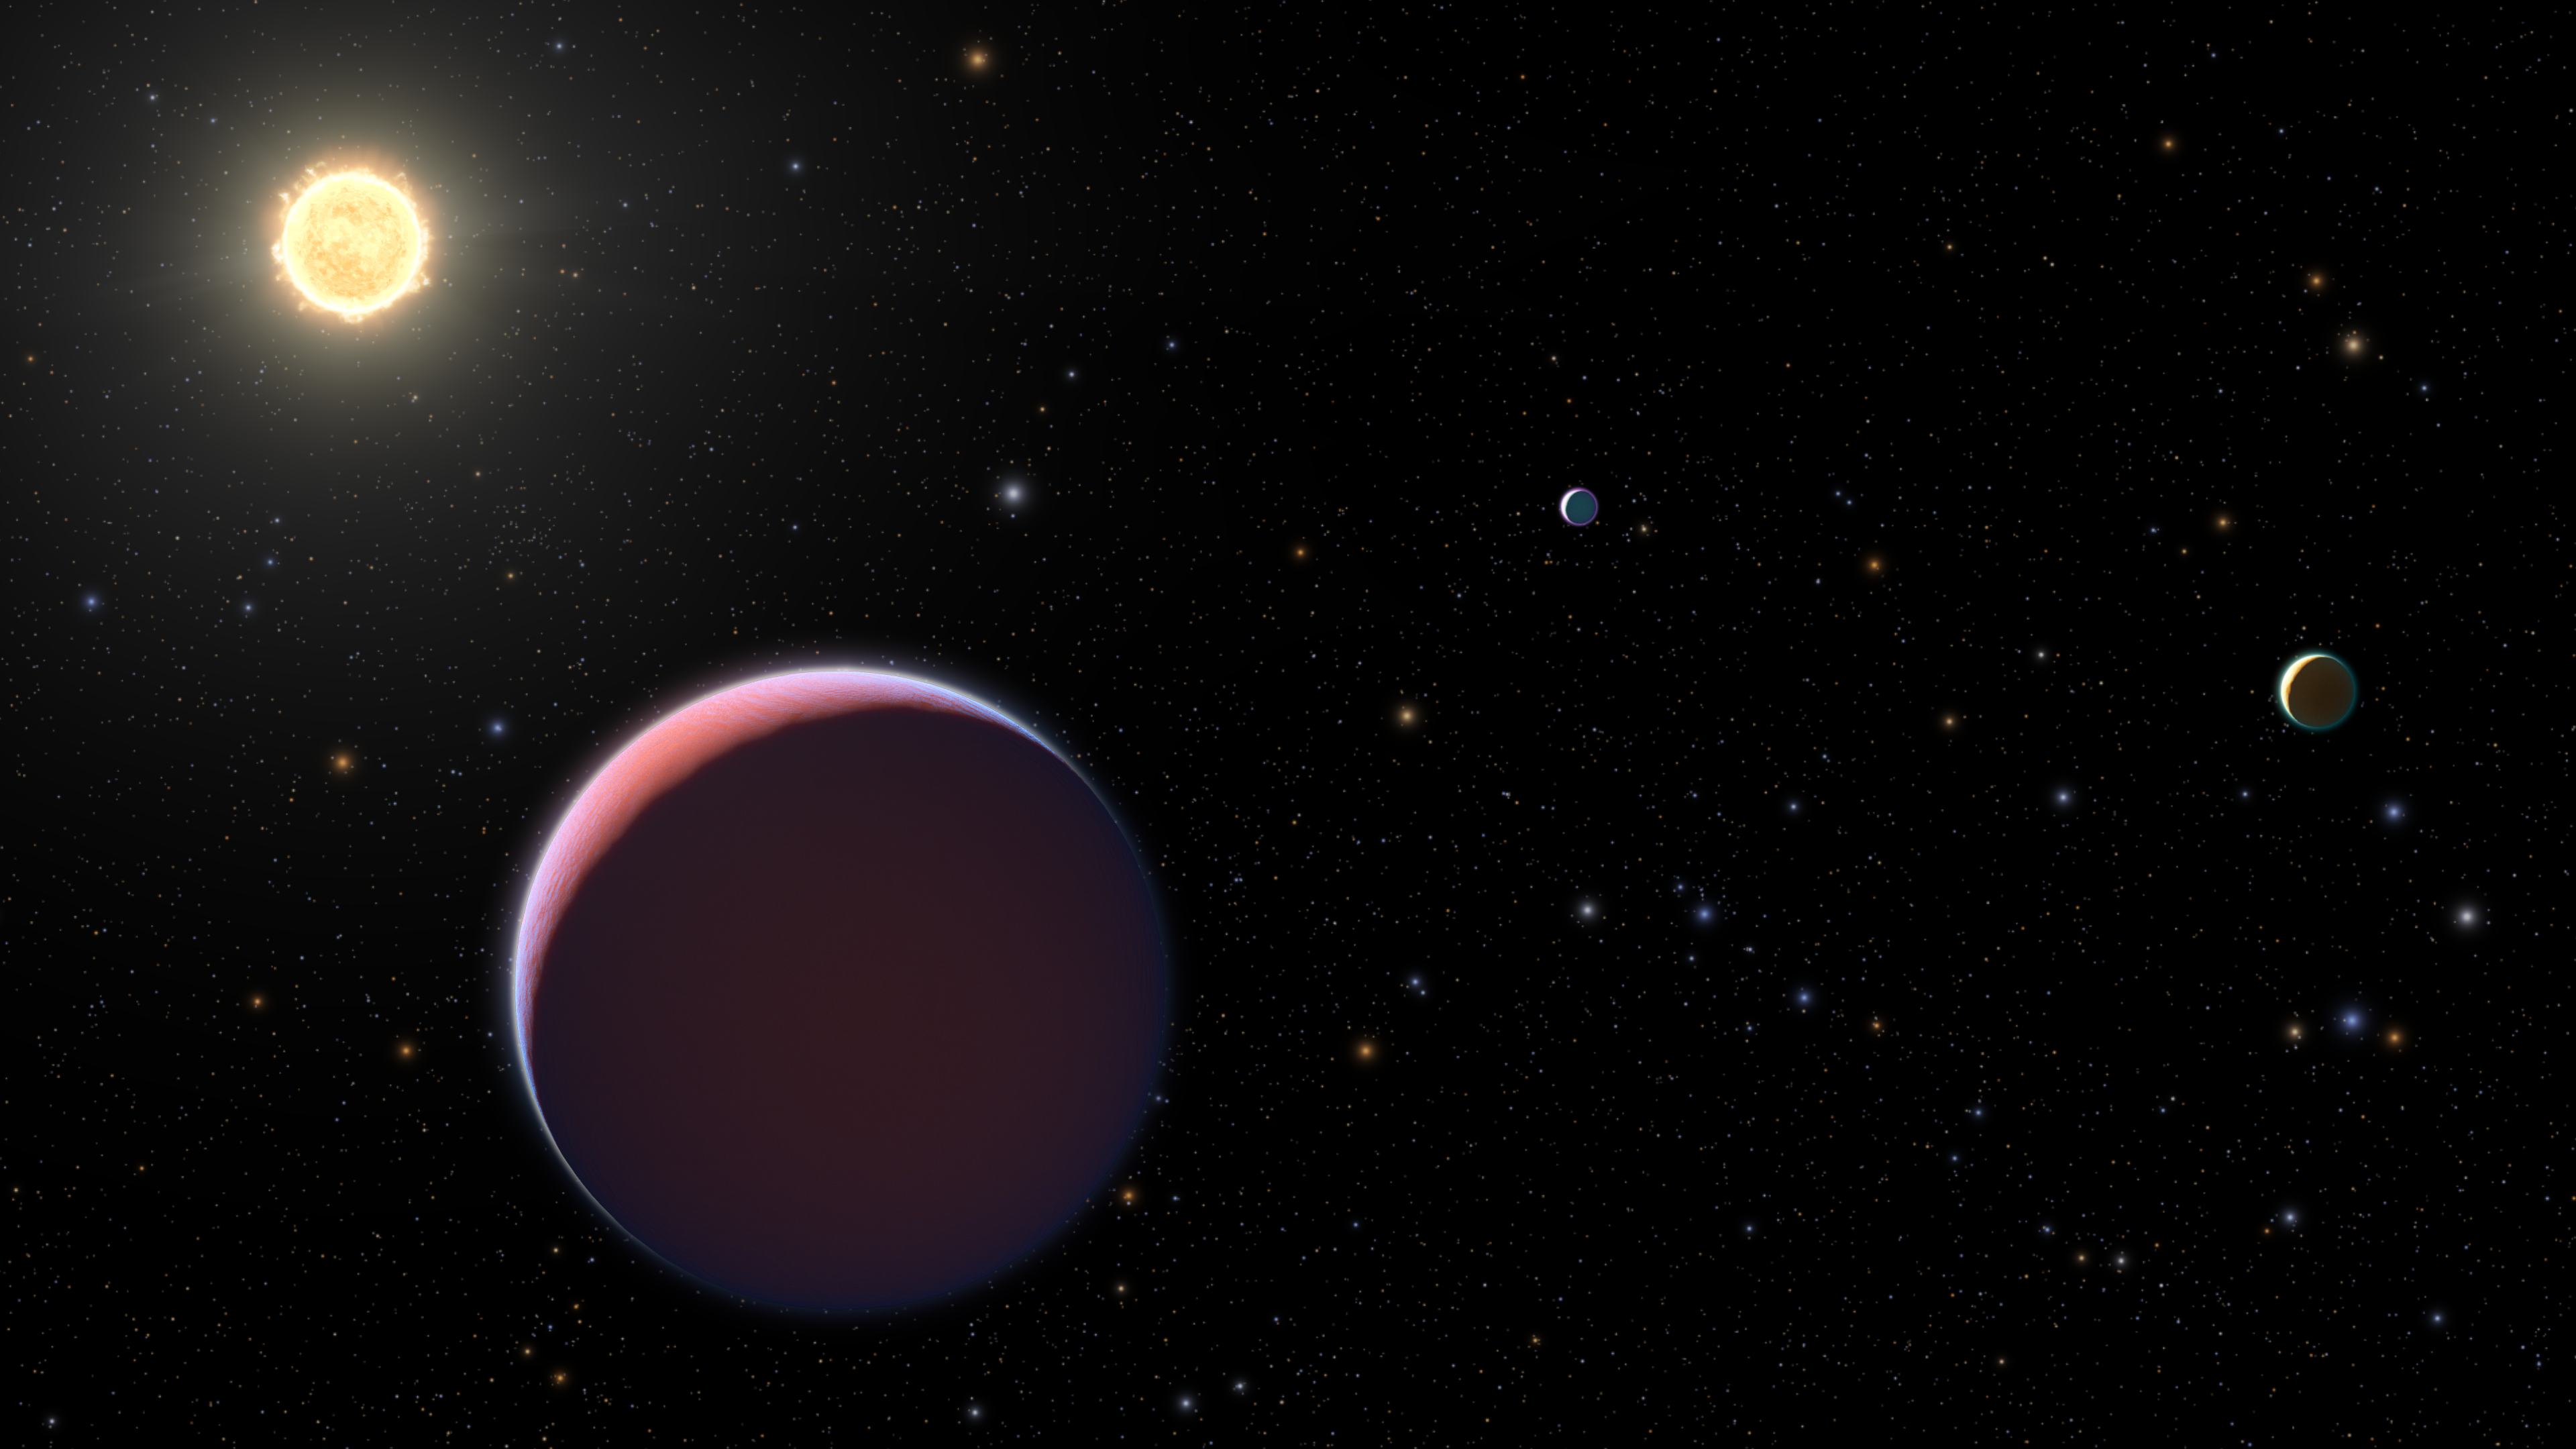 These ‘super puff’ planets have the same density as cotton candy